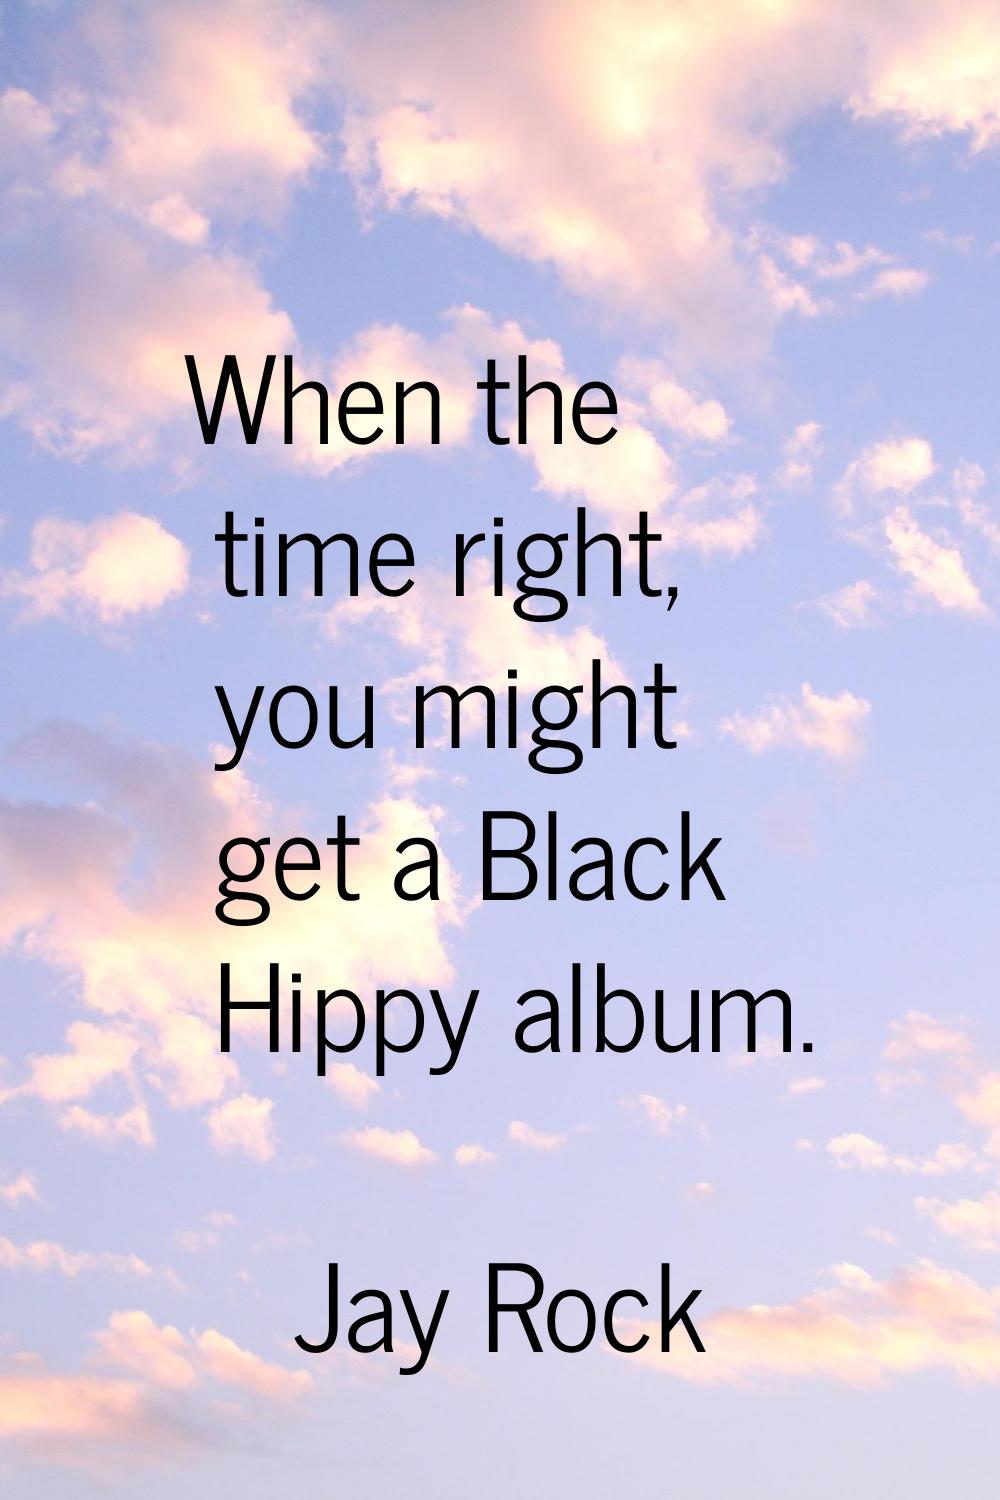 When the time right, you might get a Black Hippy album.